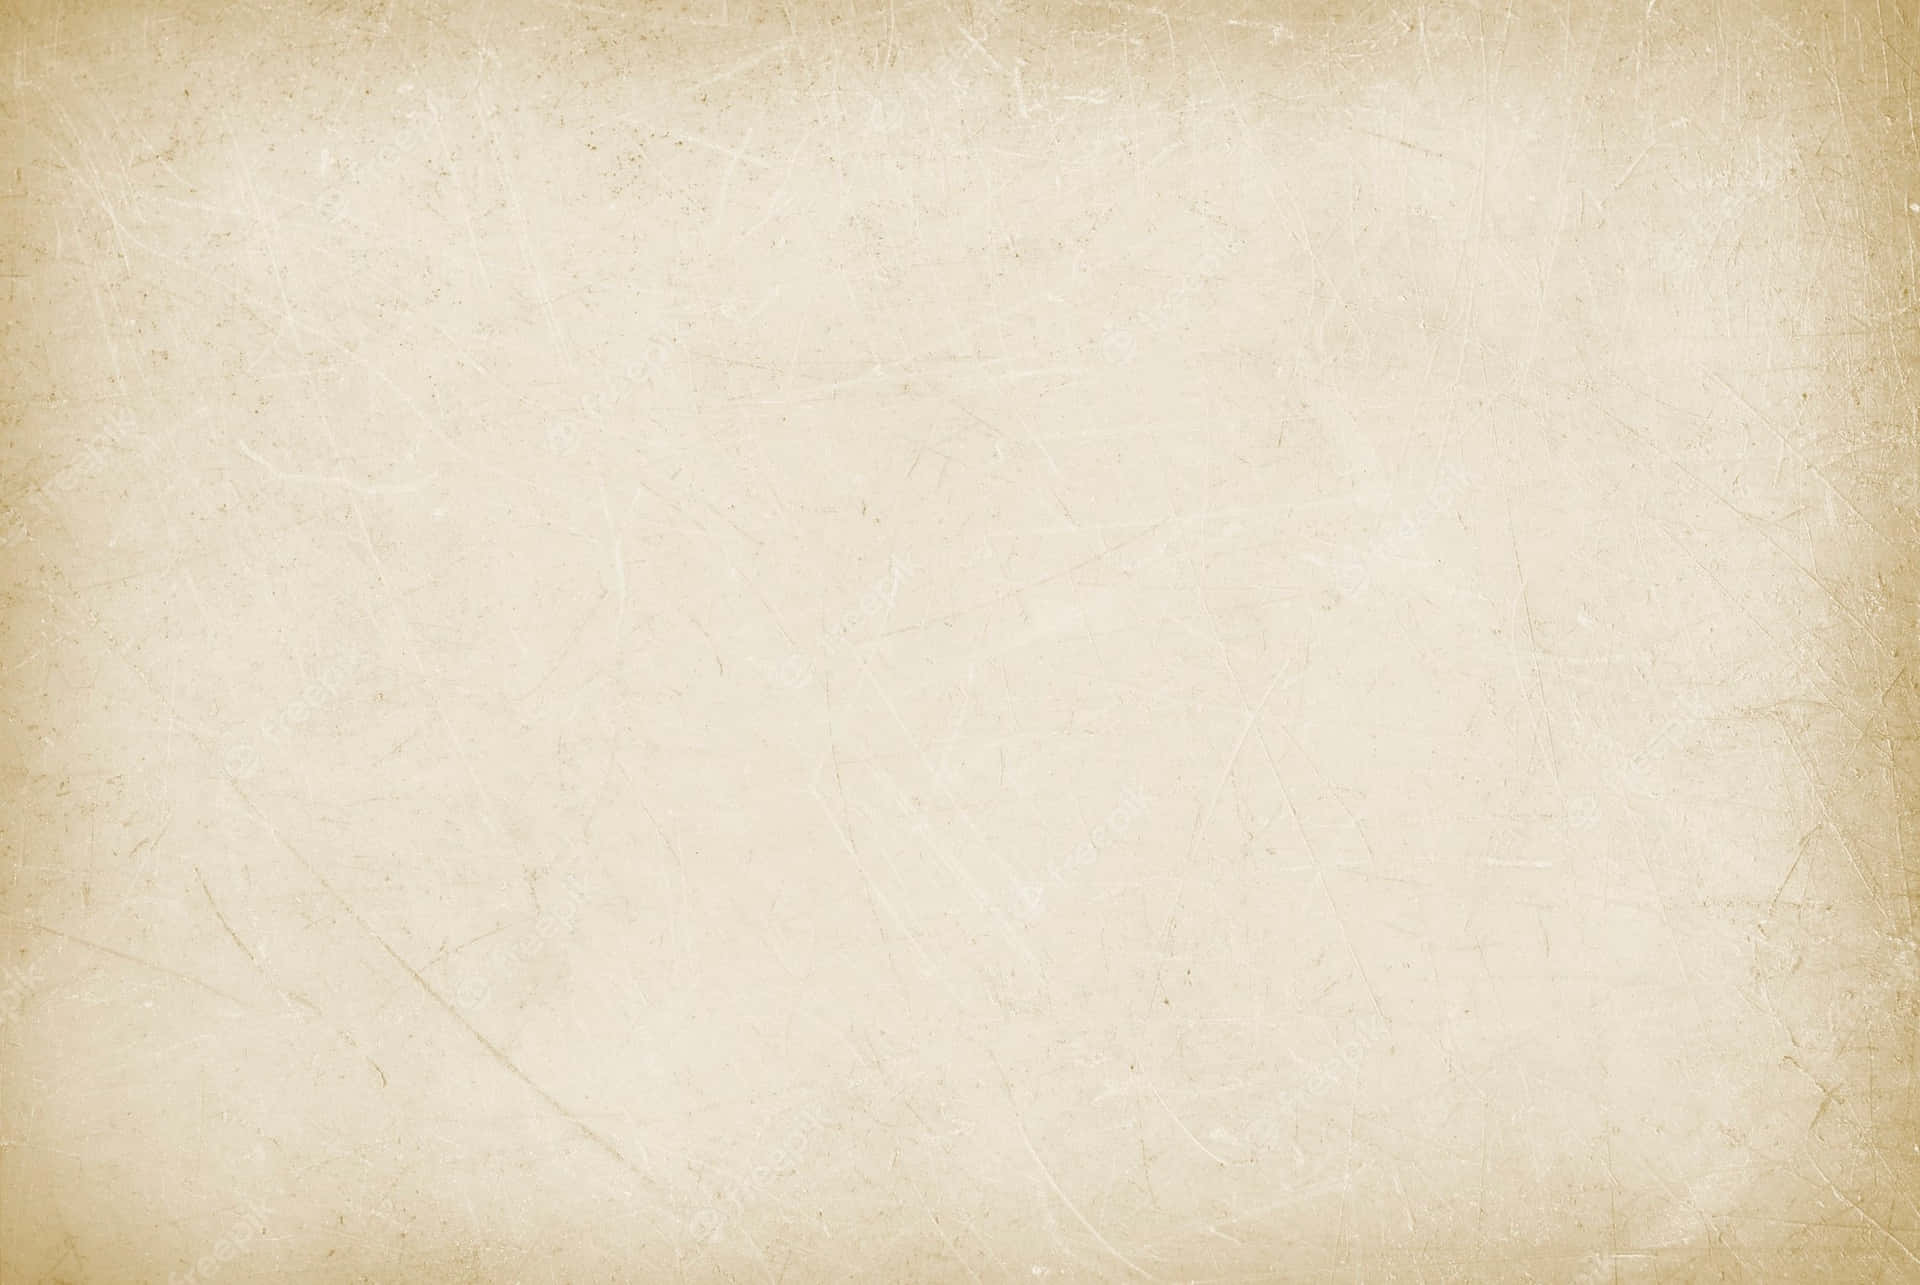 An Old Paper Background With A Beige Color